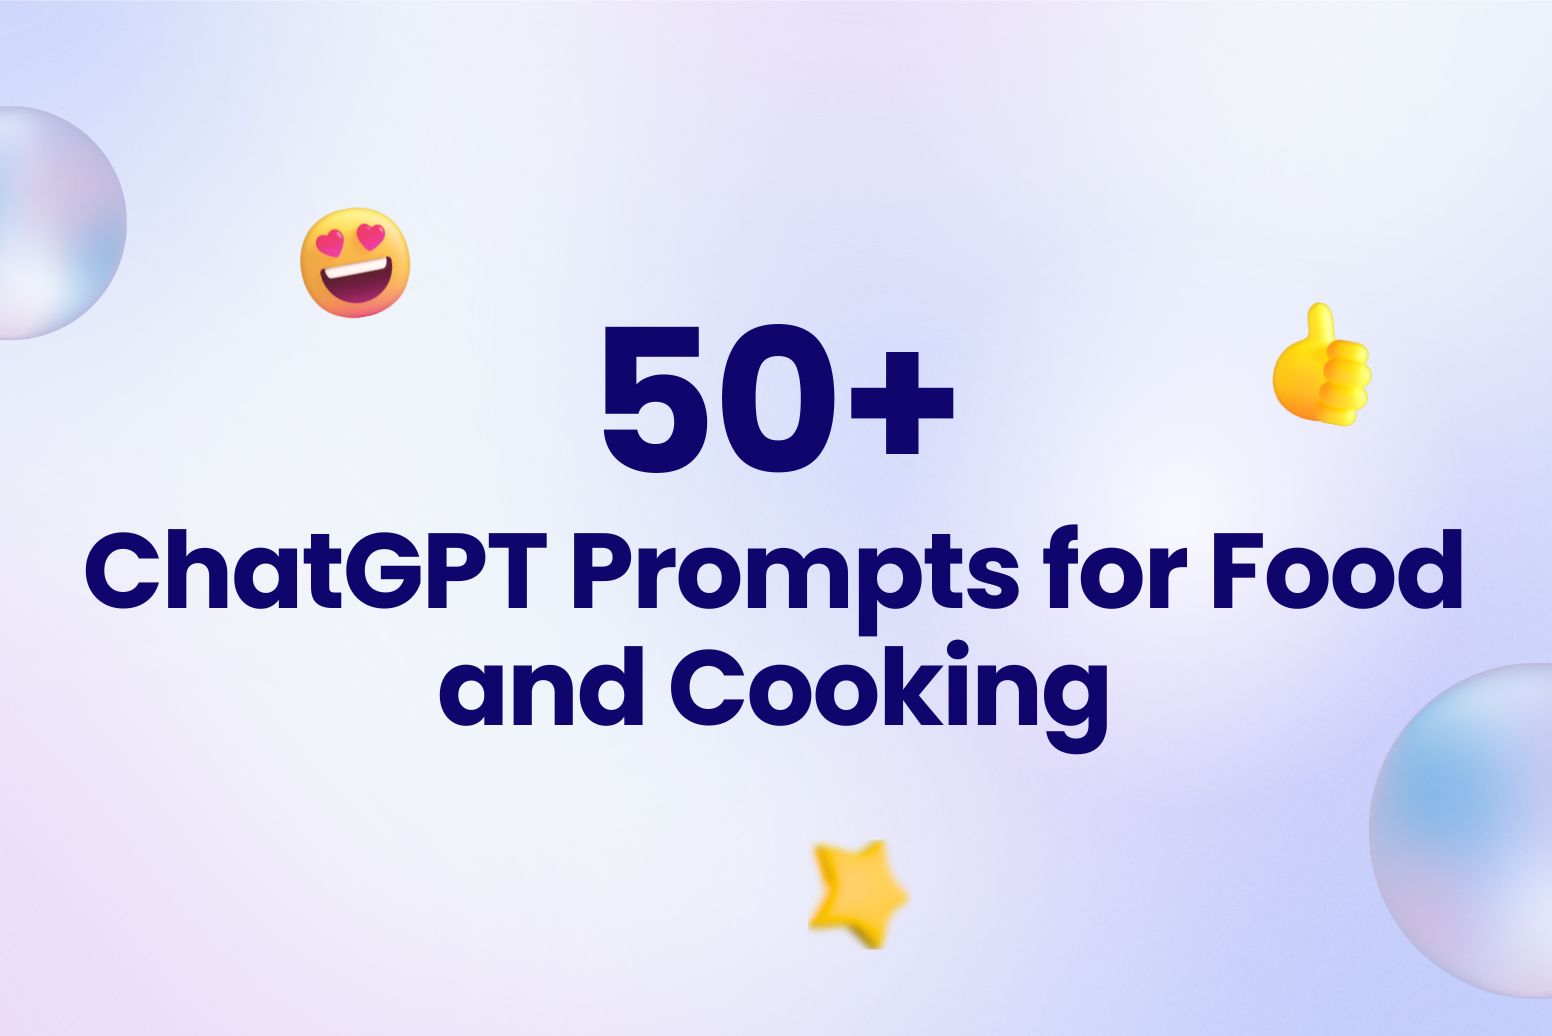 50+ ChatGPT Prompts for Food and Cooking